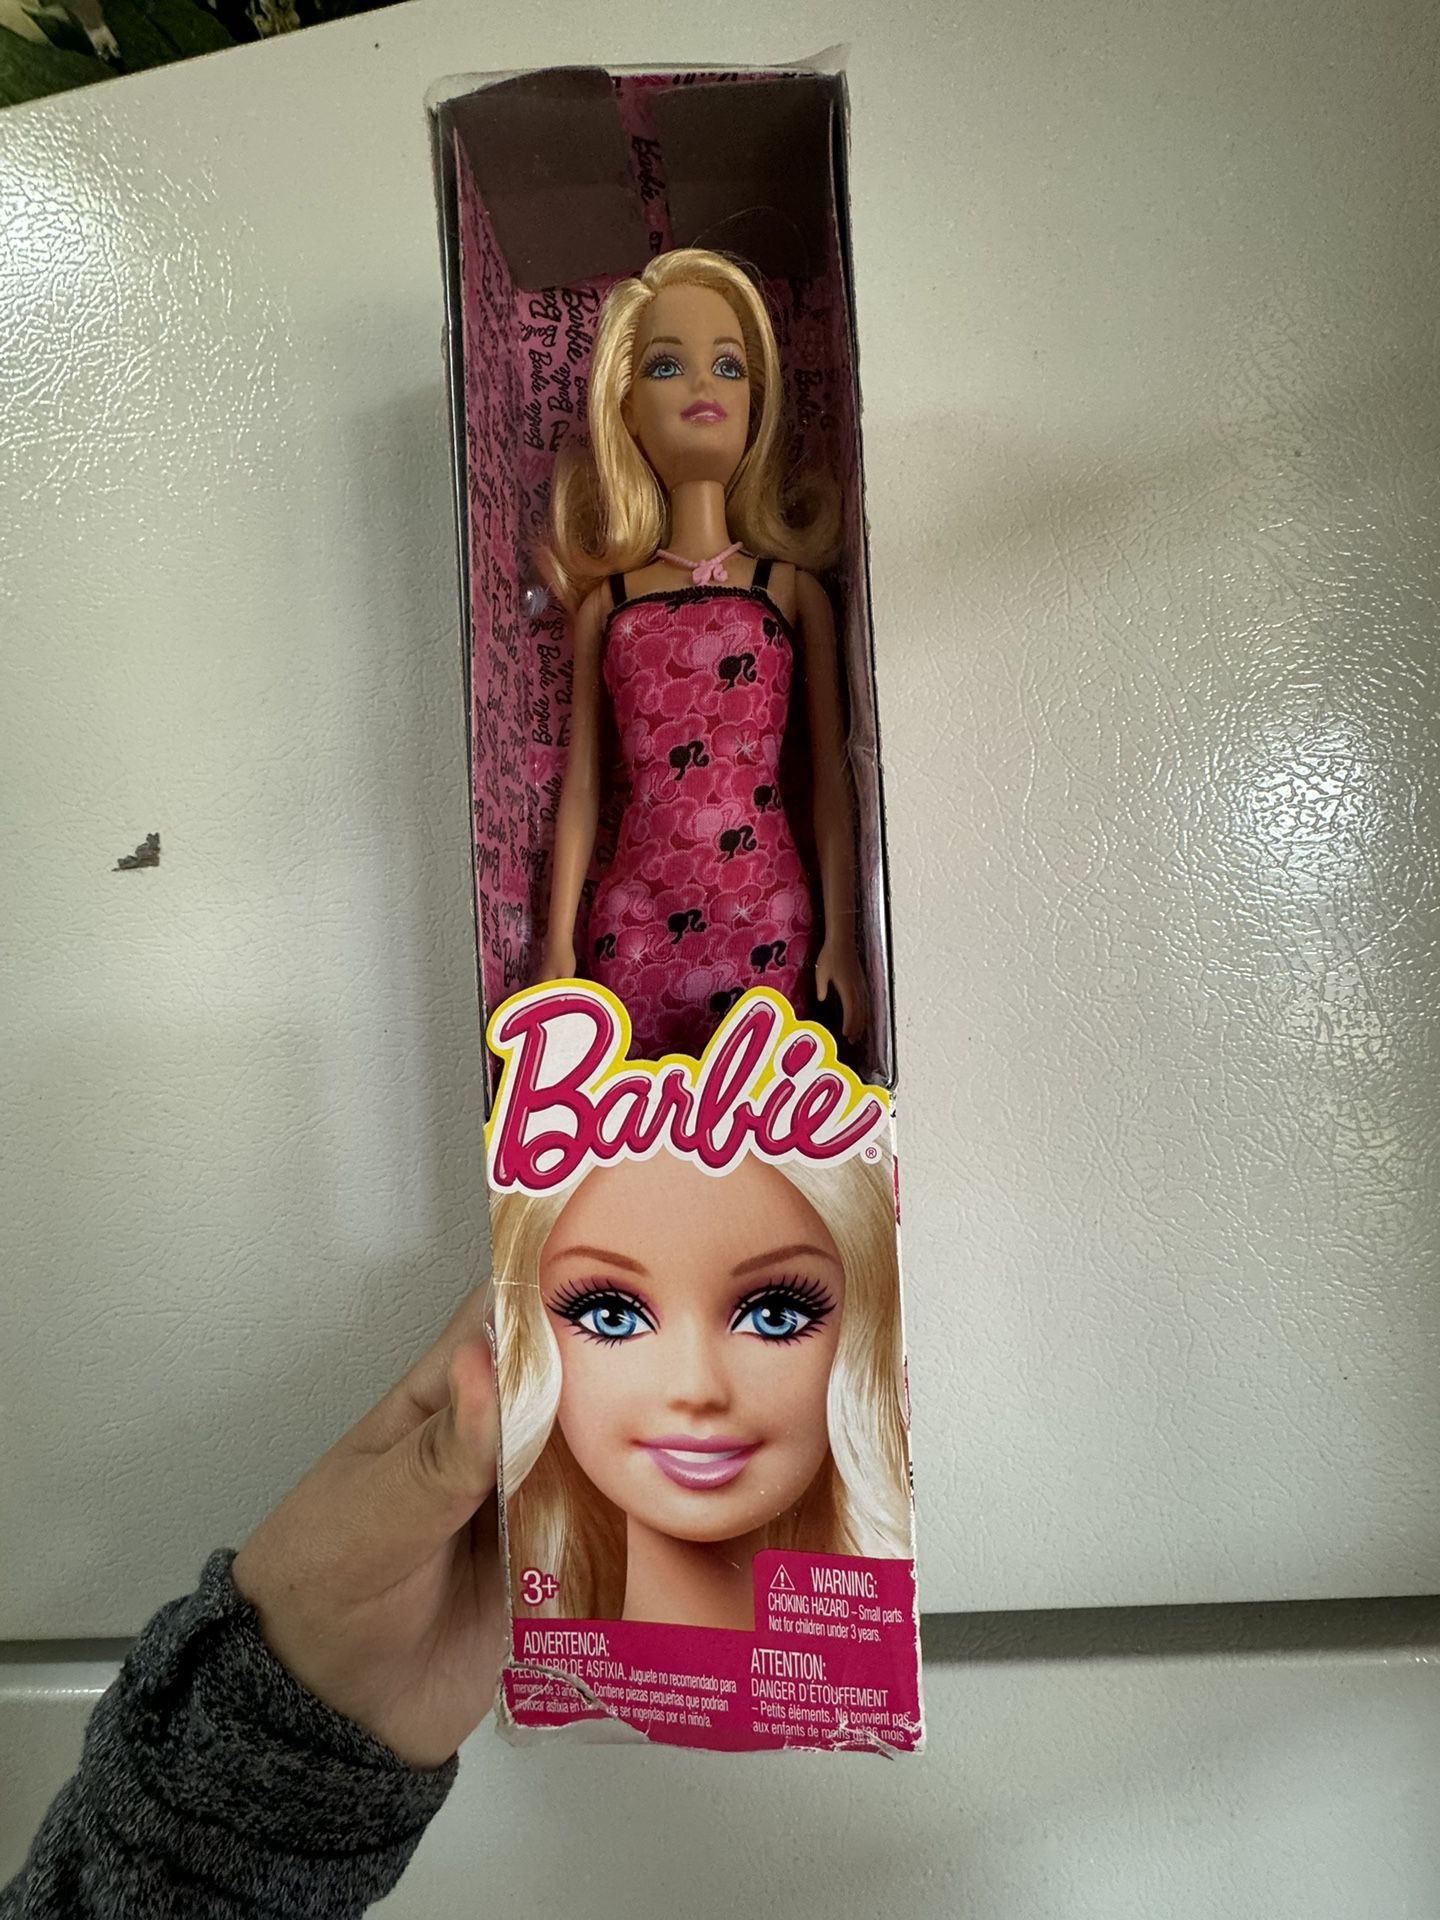 Barbie Doll 2013 RARE NECKLACE EDITION